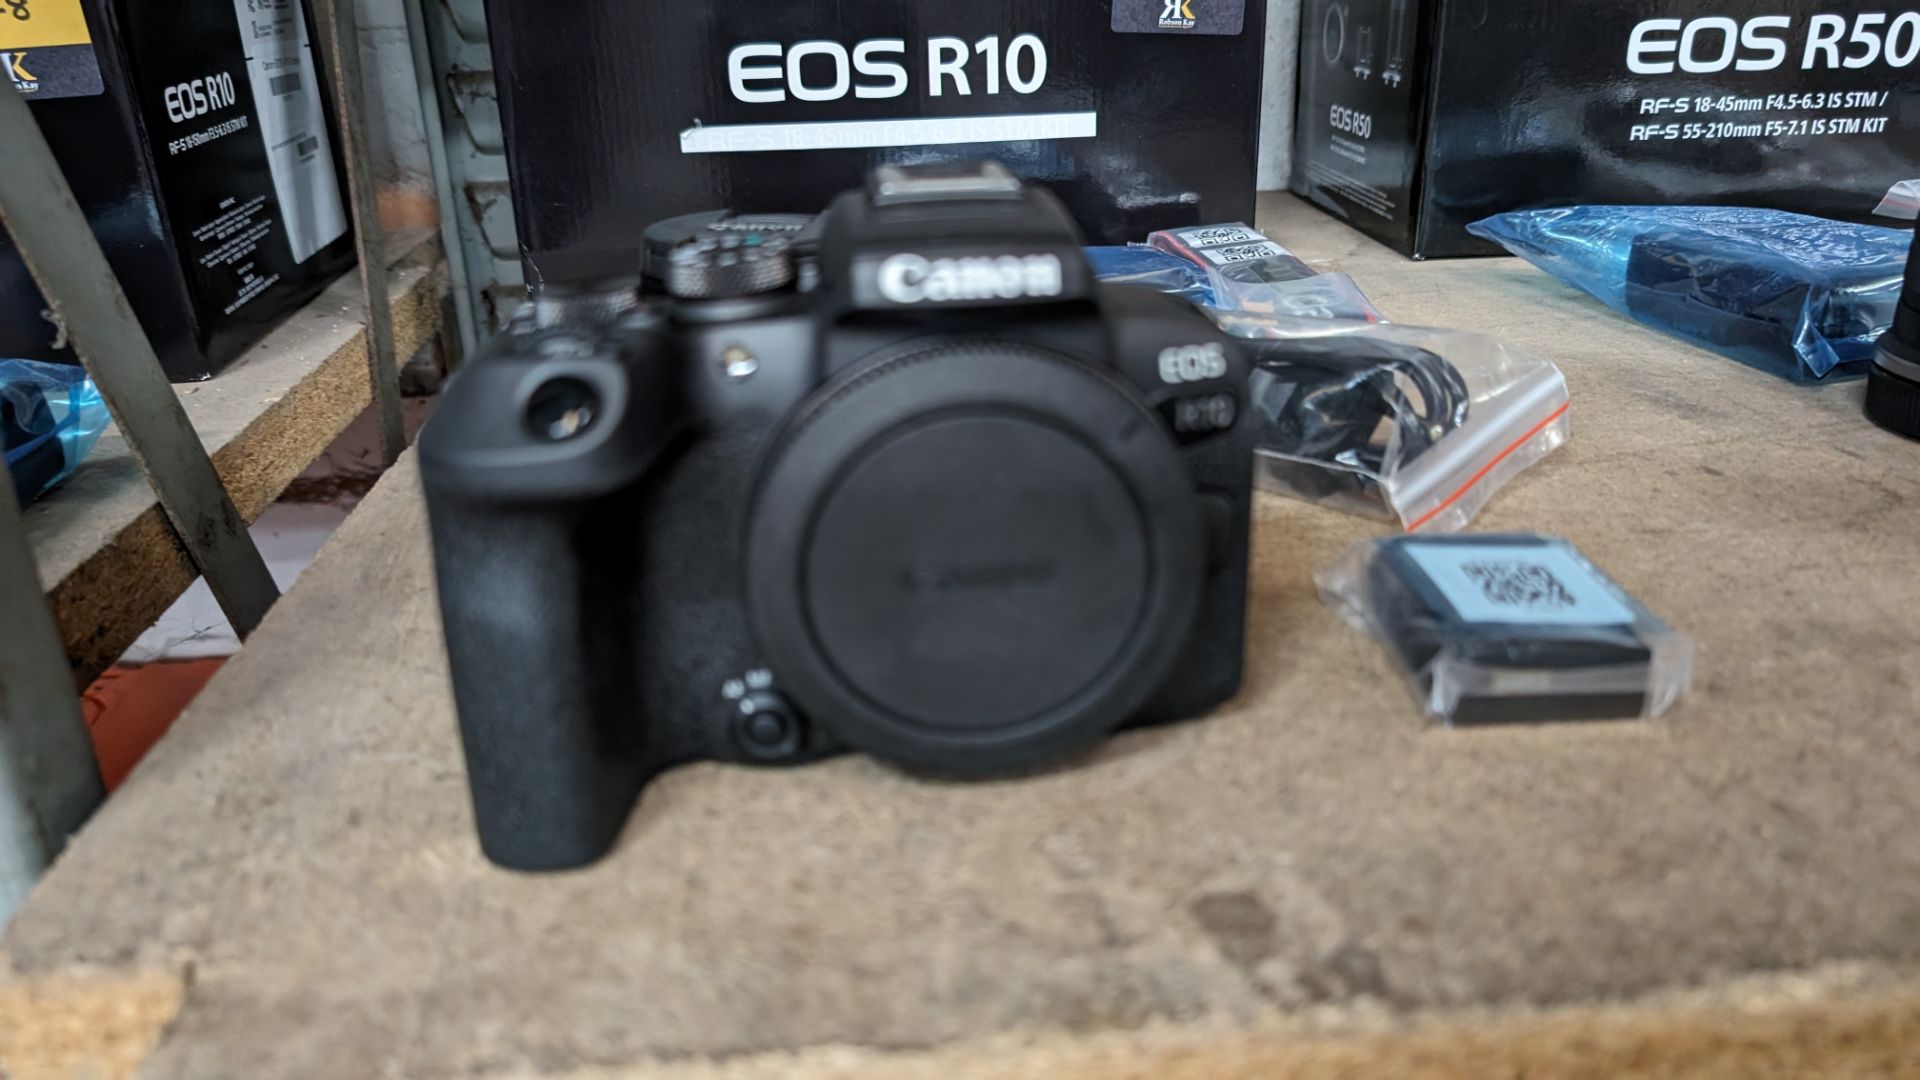 Canon EOS R10 camera kit, including 18-45mm lens, plus strap, battery, charger, cable and more - Image 5 of 14